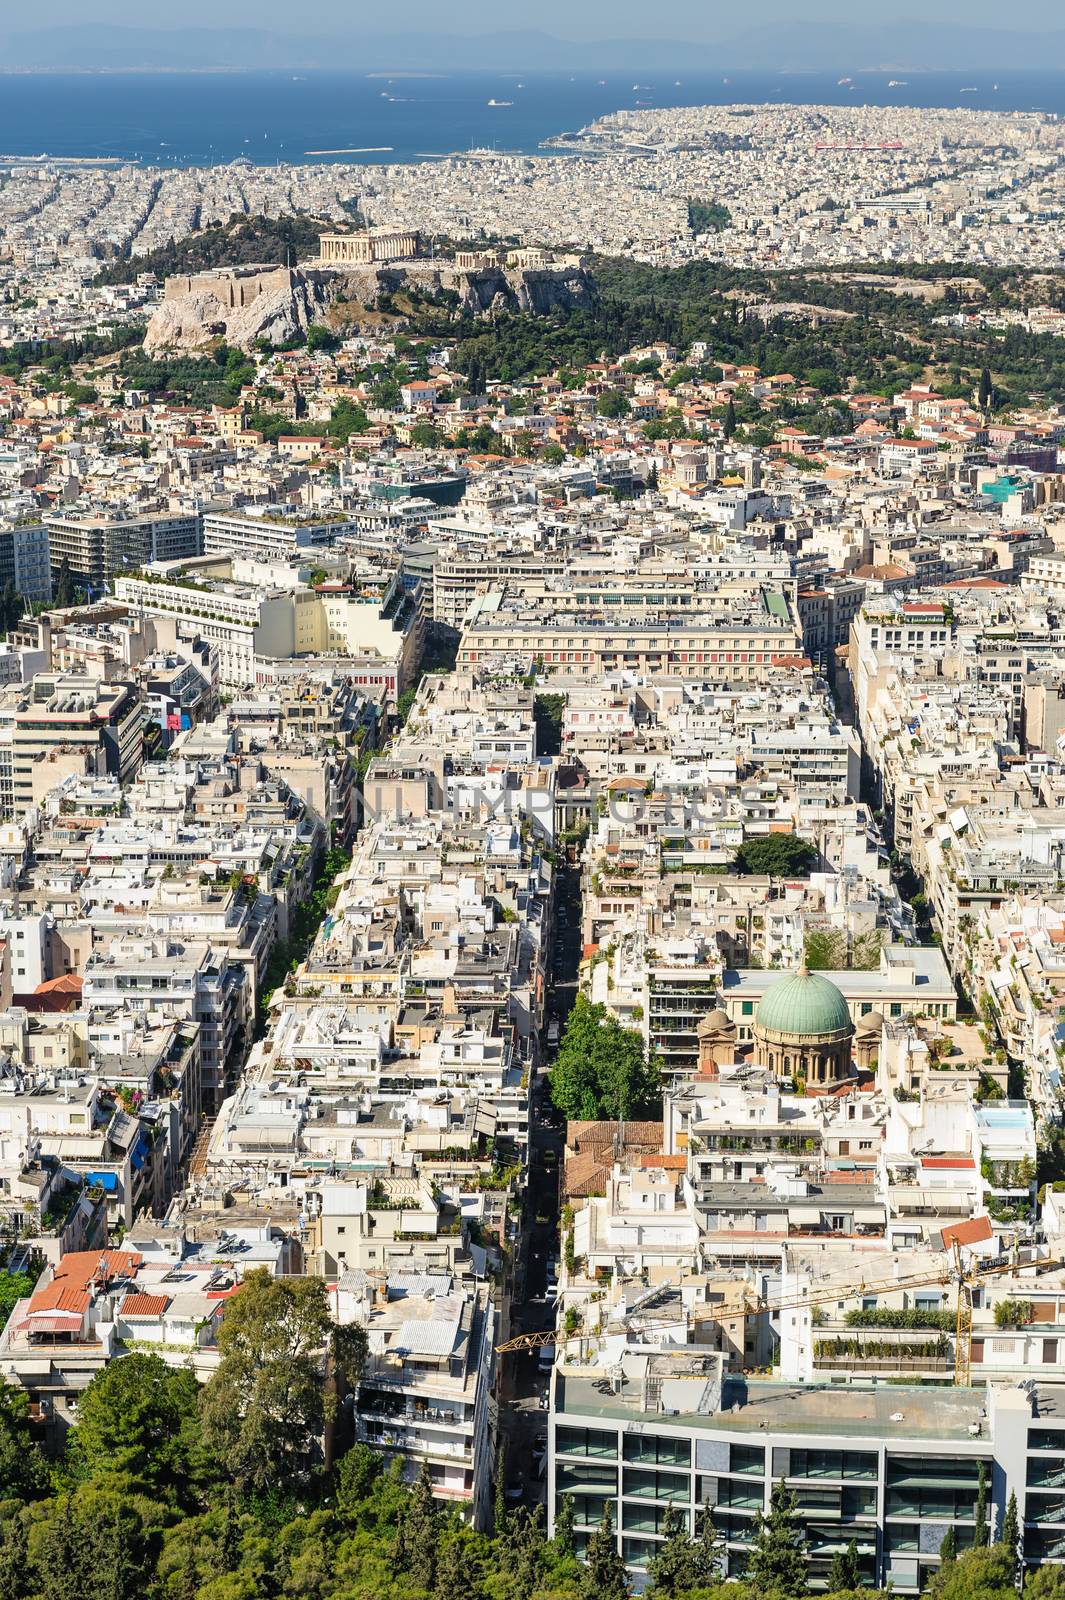 Cityscape of Athens, Greece made at morning from Lycabettus Hill. Acropolis hill can be seen.